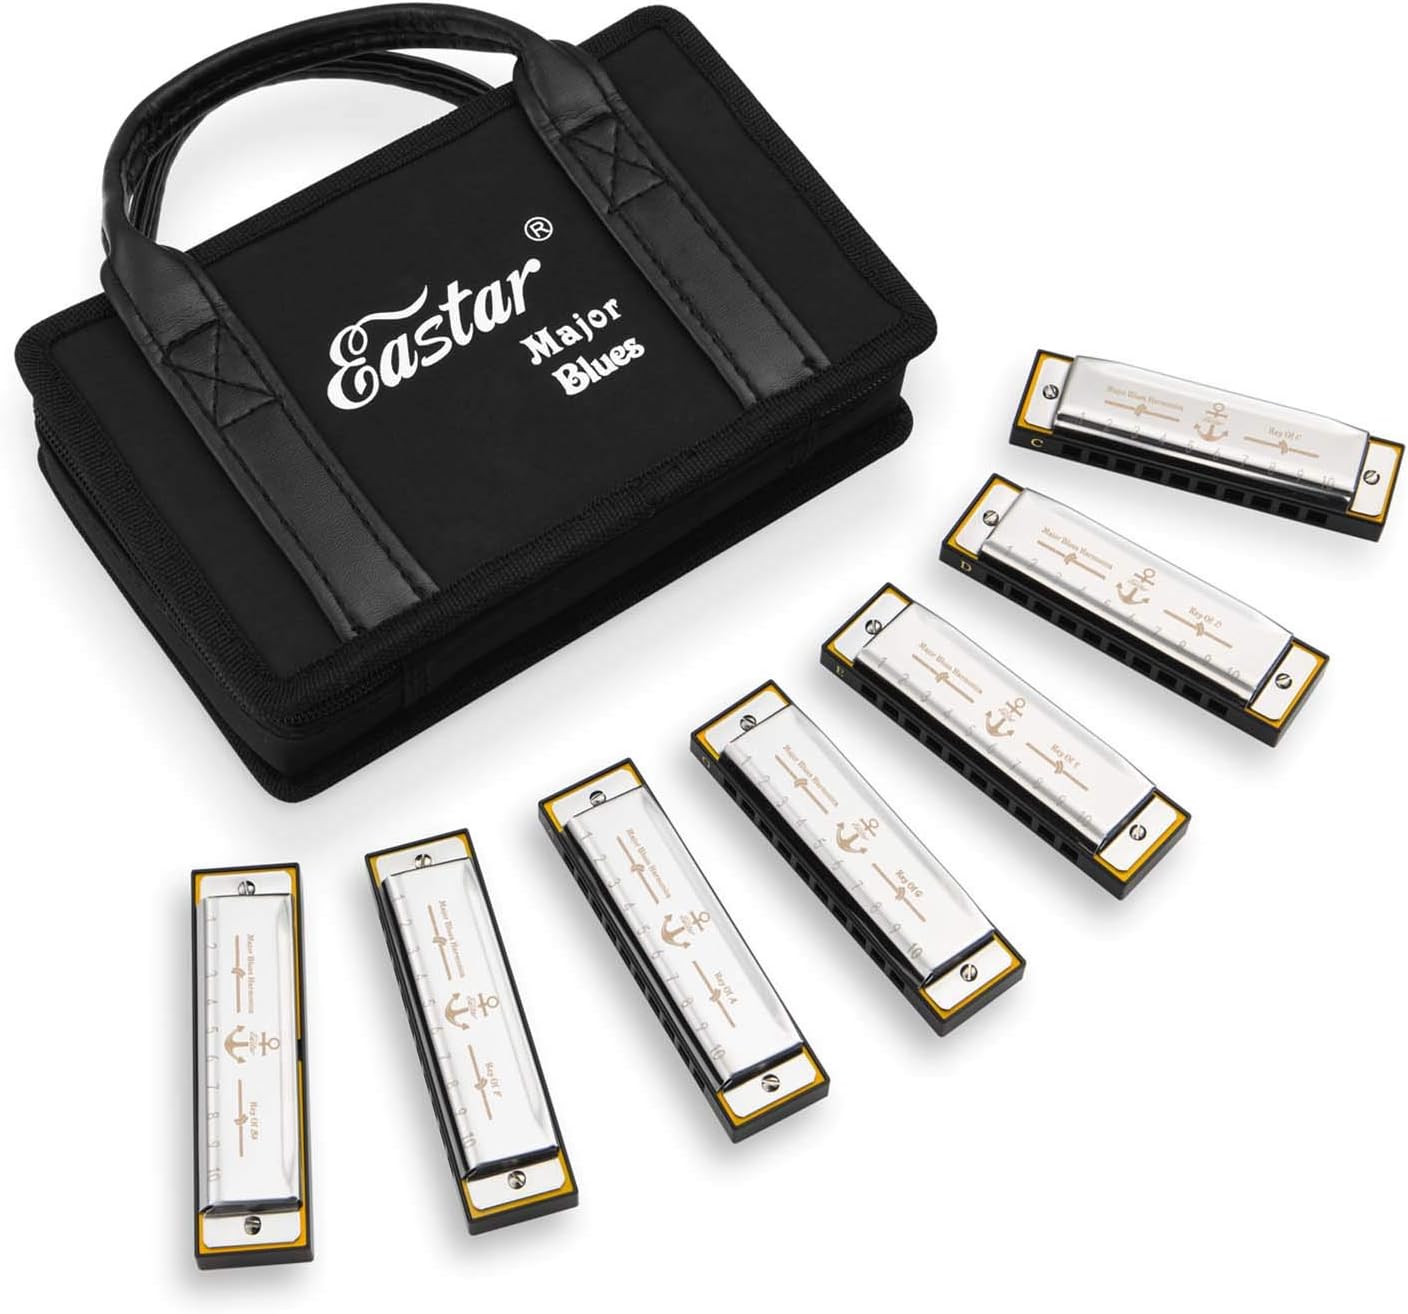 Eastar Major Blues Harmonica Sets 7 Keys Diatonic Harmonica in Key of C D E F G A Bb for Adults, Beginners, Students, and Kids.  7-Pack with Carrying Case & Cleaning Cloth.  Nickel